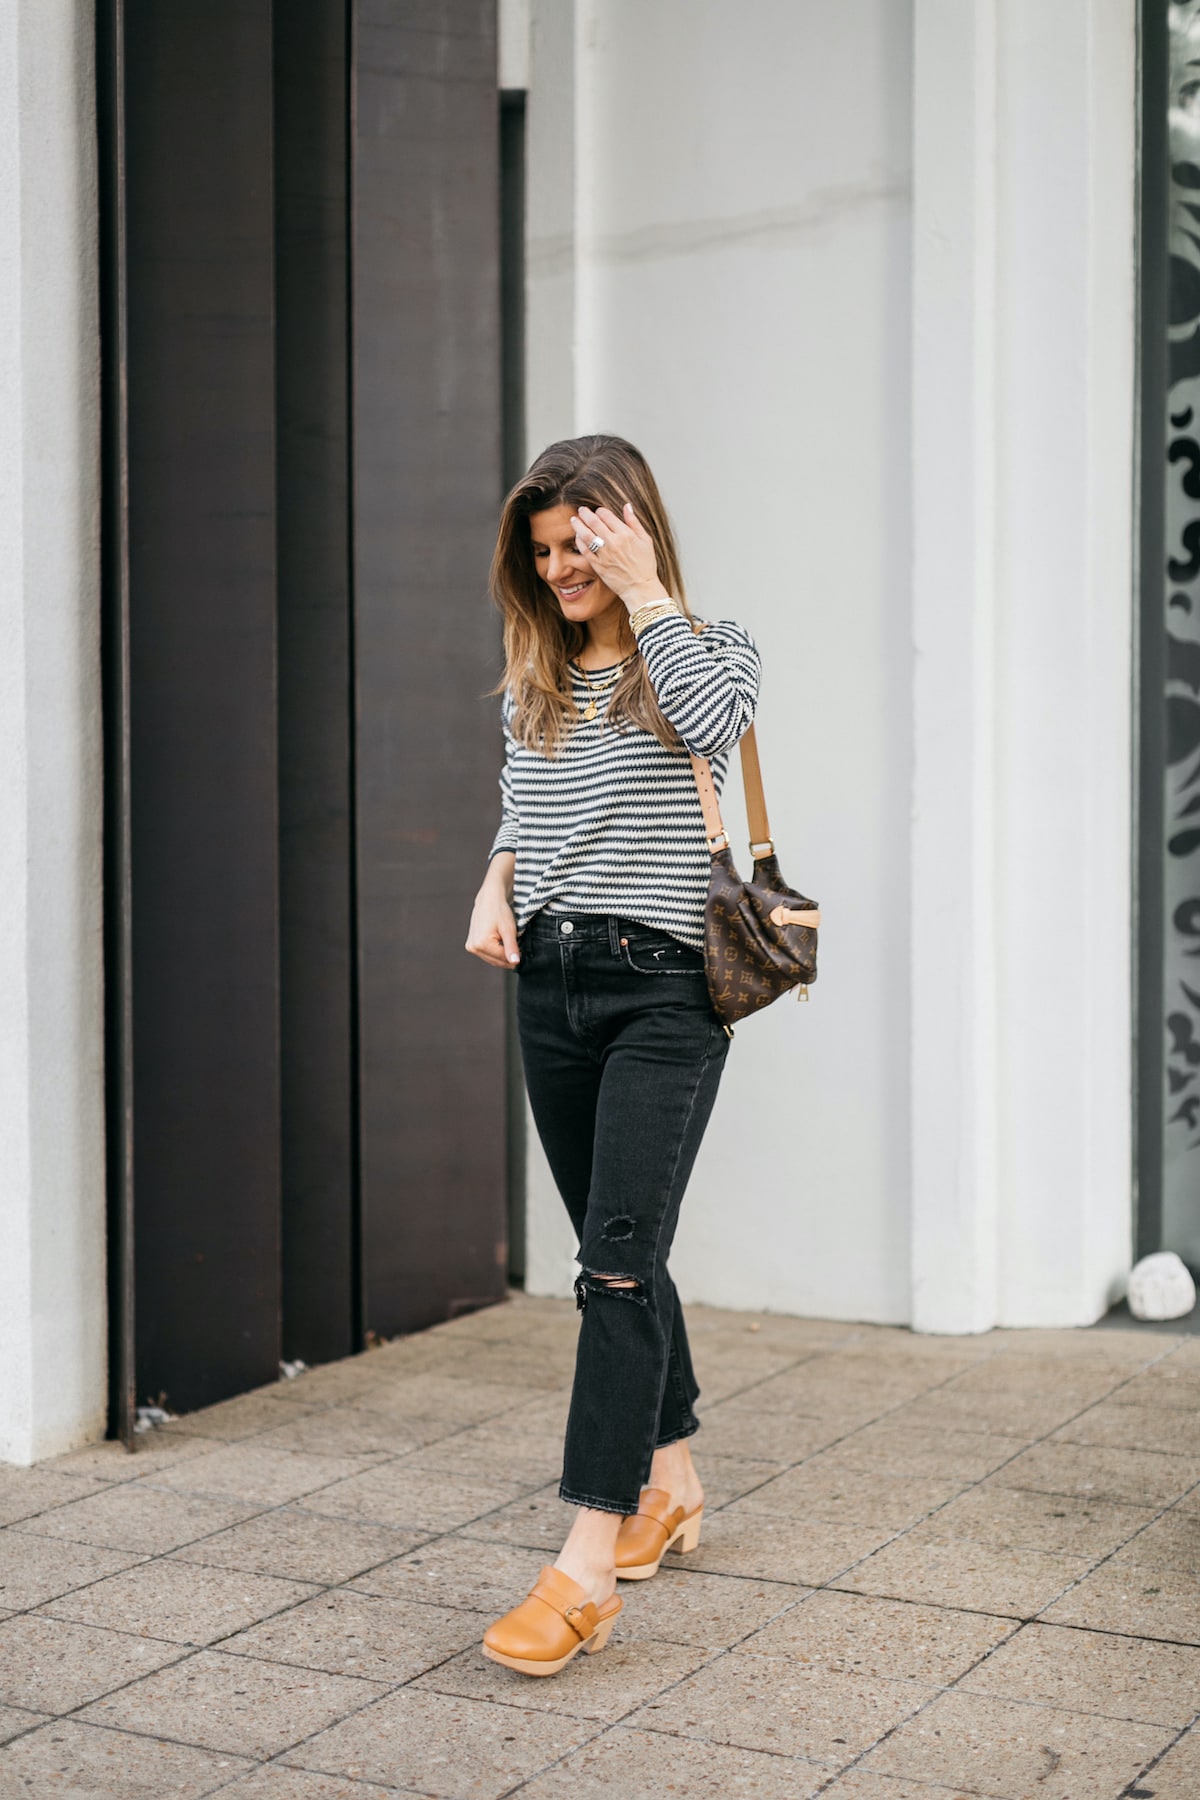 Brighton Butler wearing madewell clogs, striped sweater, black abercrombie jeans and bumbag